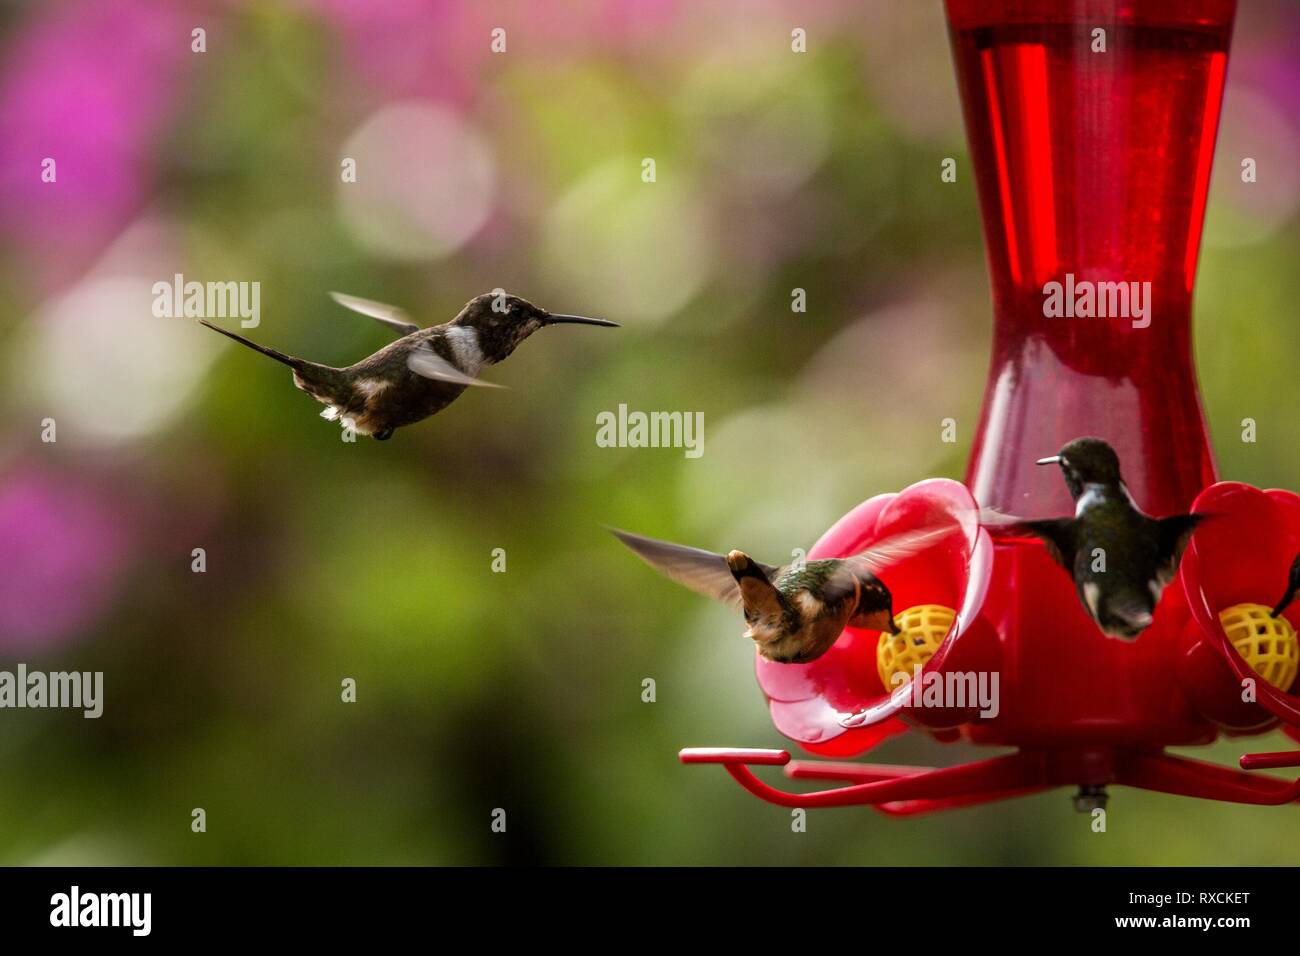 Hummingbirds with outstretched wings,tropical forest,Peru,birds hovering next to red feeder with sugar water, garden,clear background,nature scene,wil Stock Photo